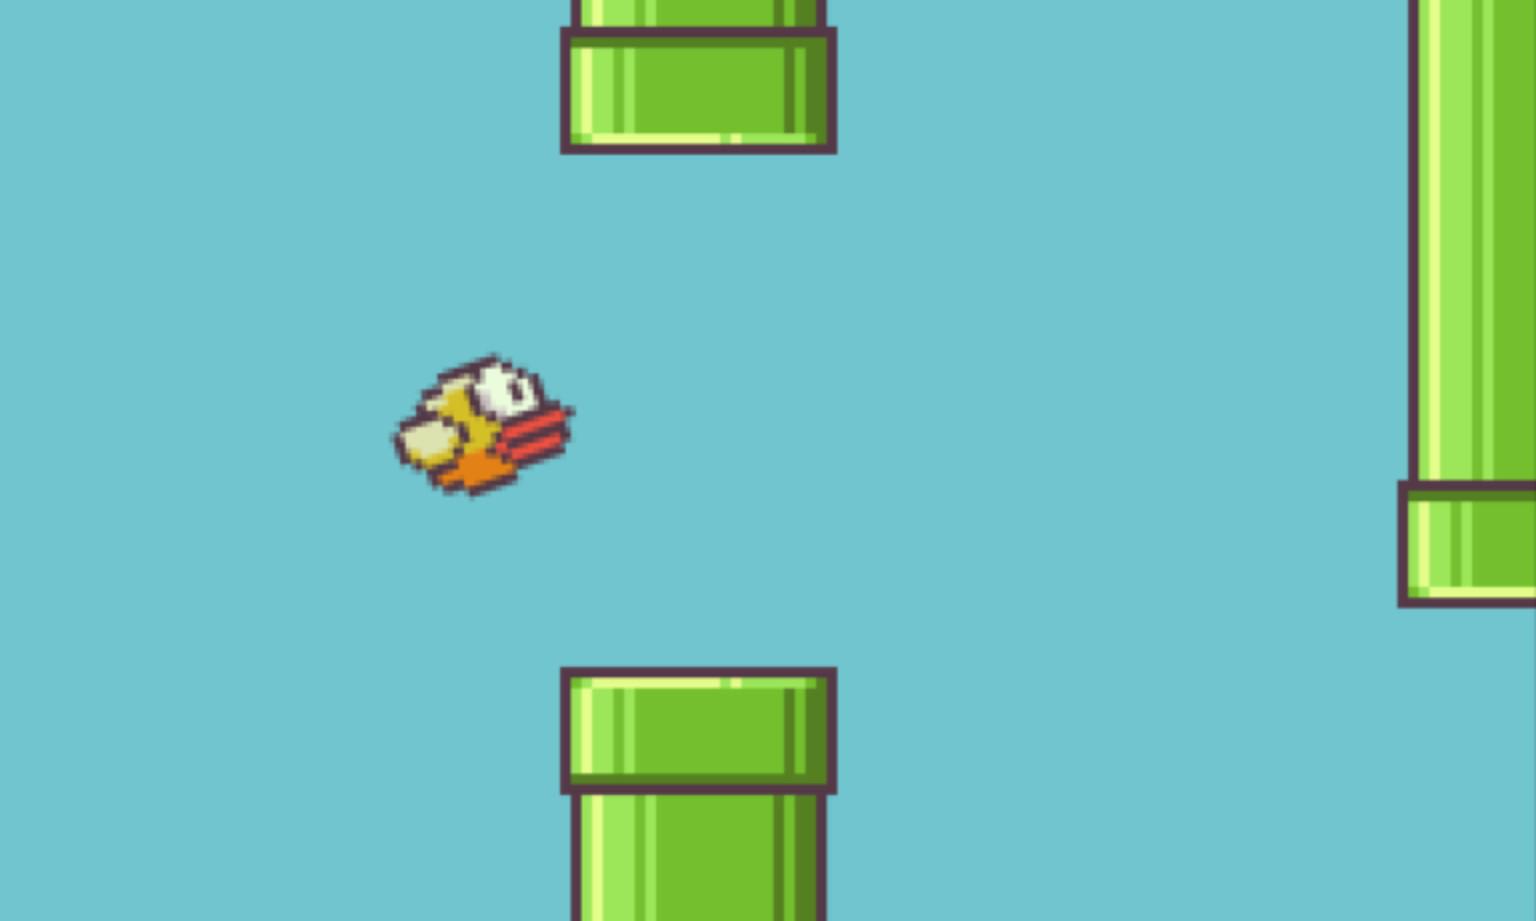 10 reasons why Vietnam-made game Flappy Bird is so addictive